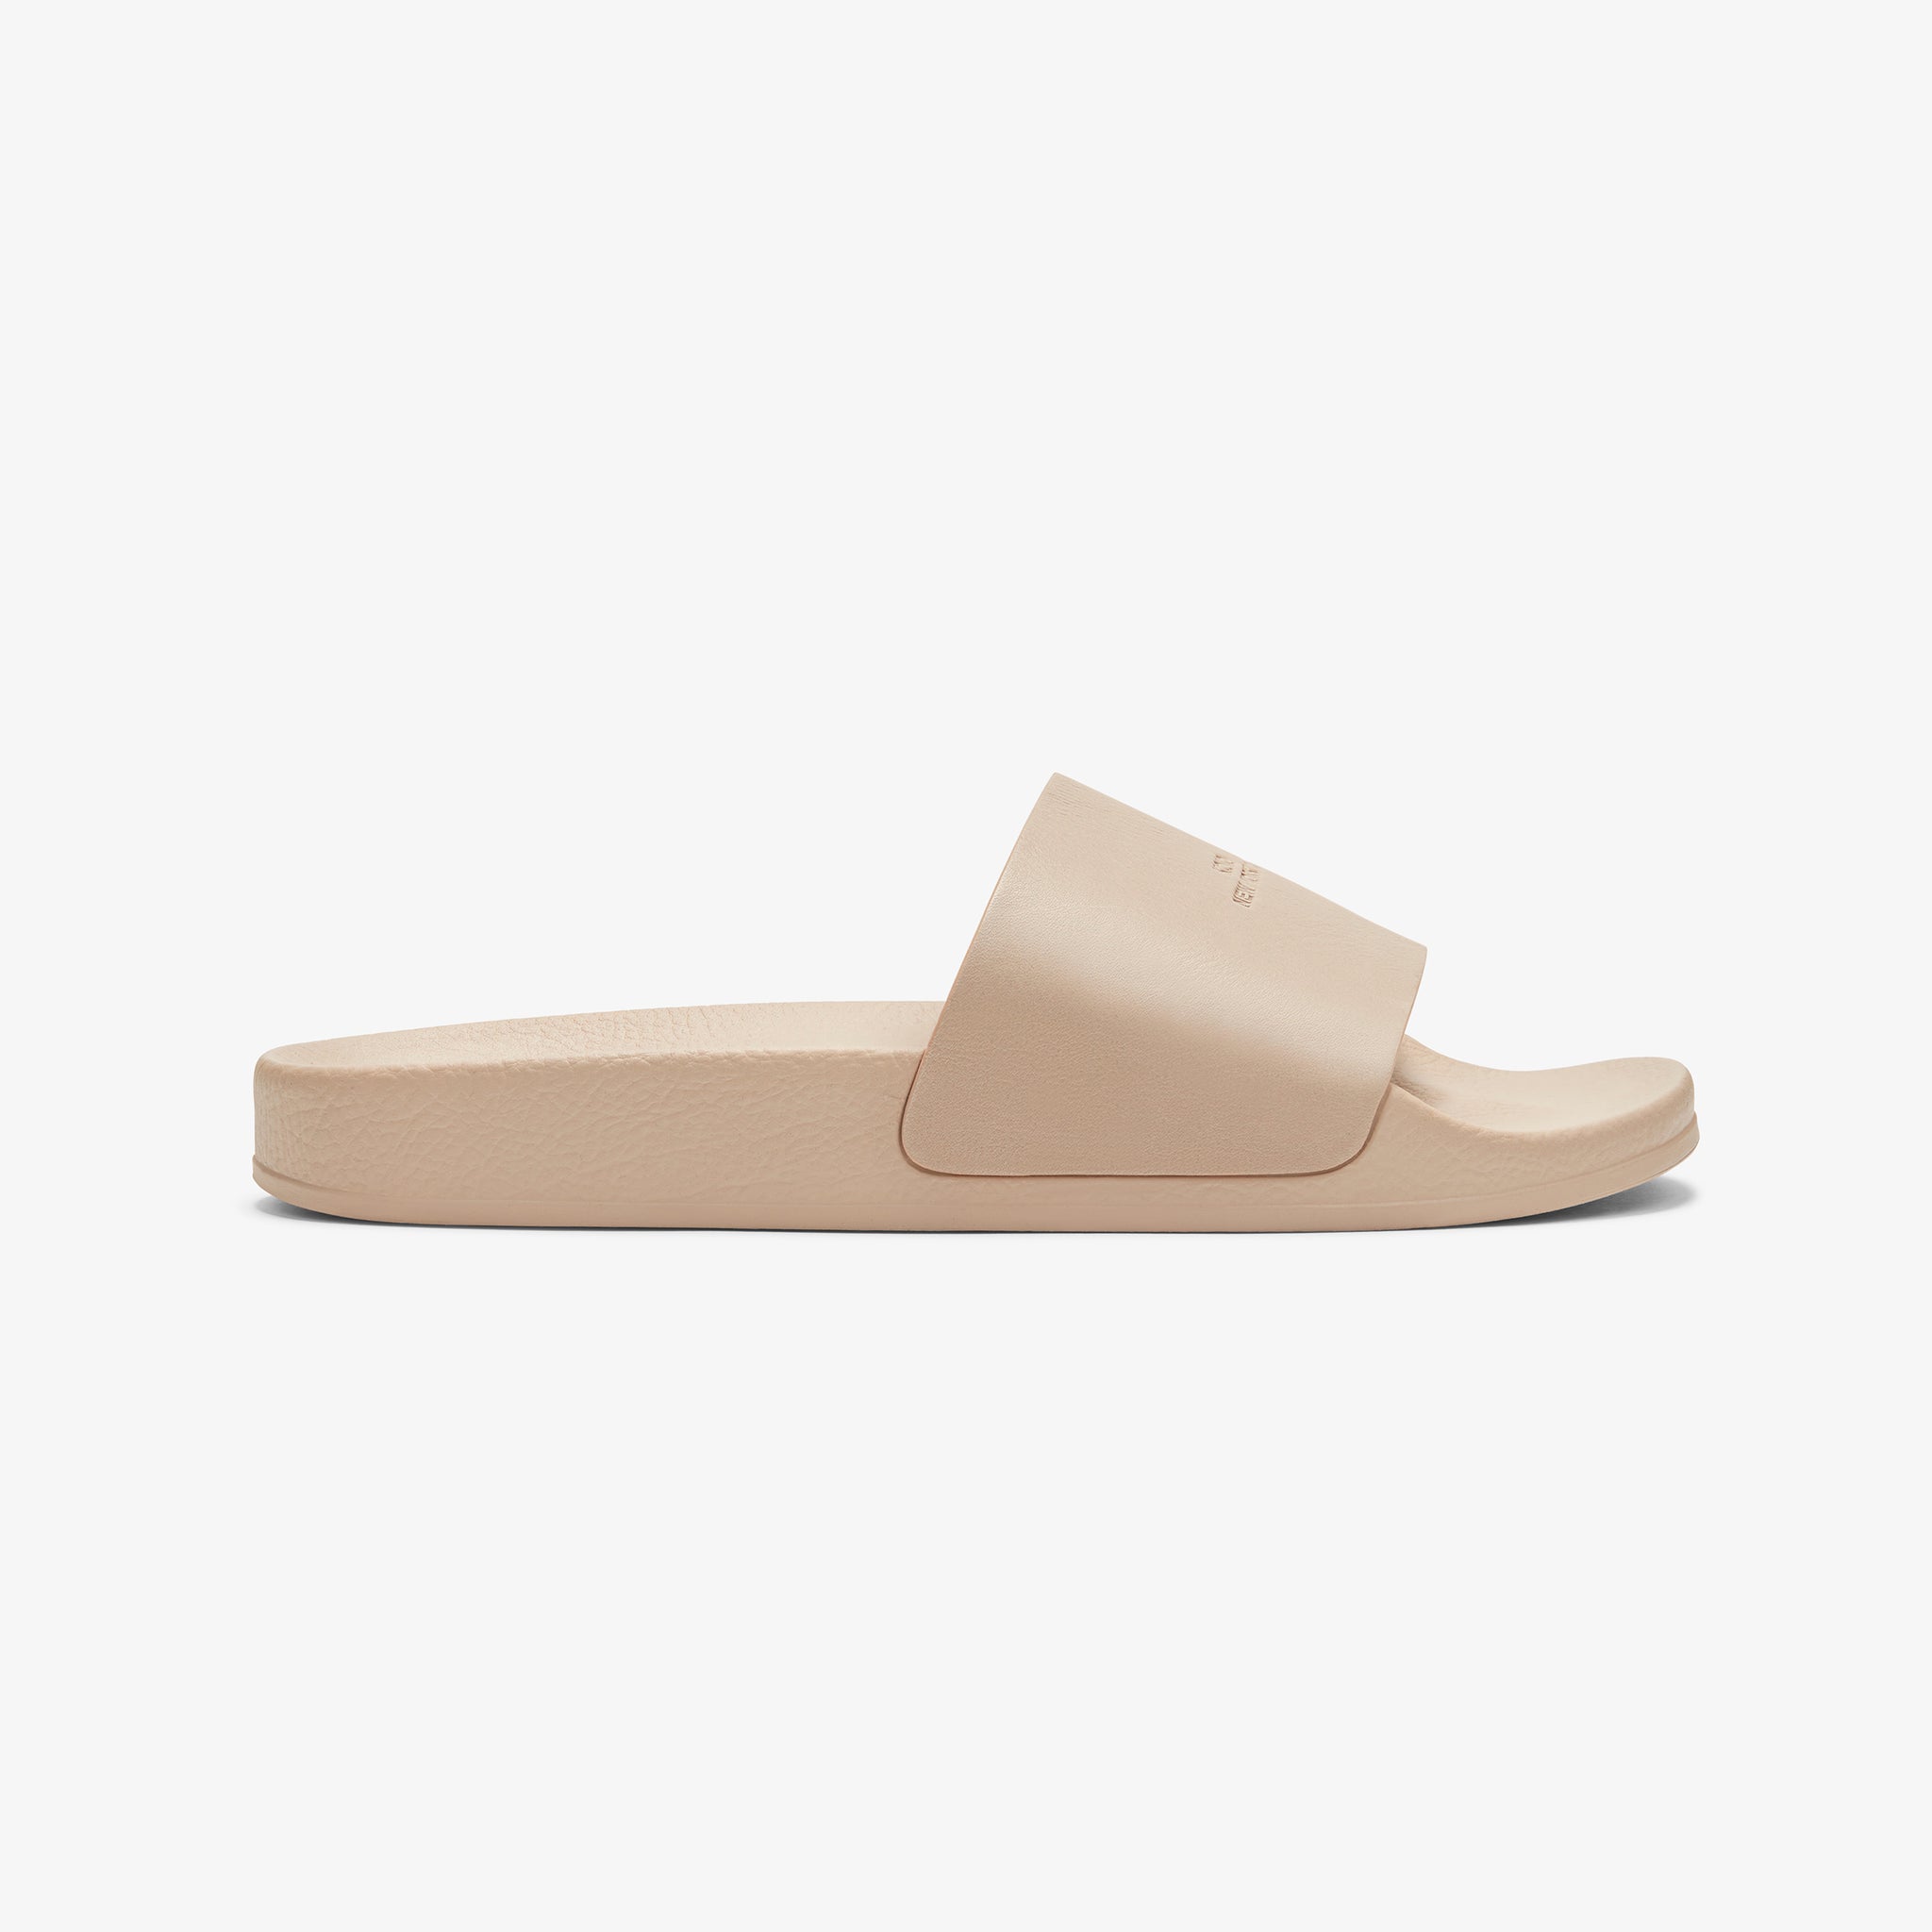 Packshot image of the KOIO Elba Slide - Leather in Taupe